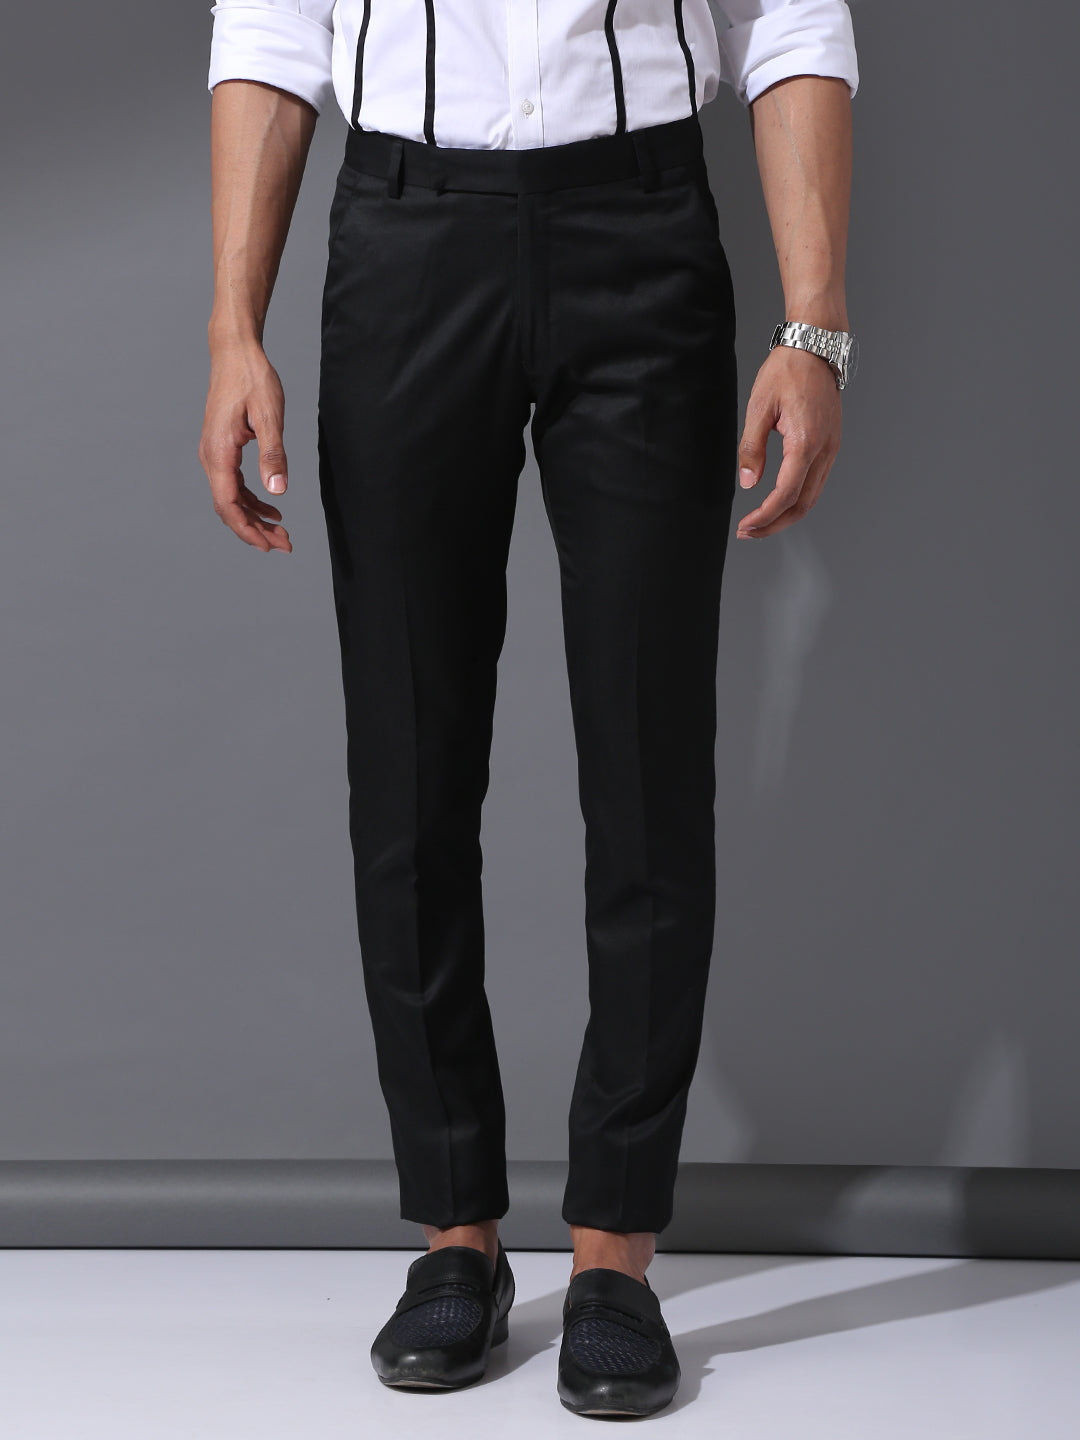 Buy Pink Trousers & Pants for Men by Mr Button Online